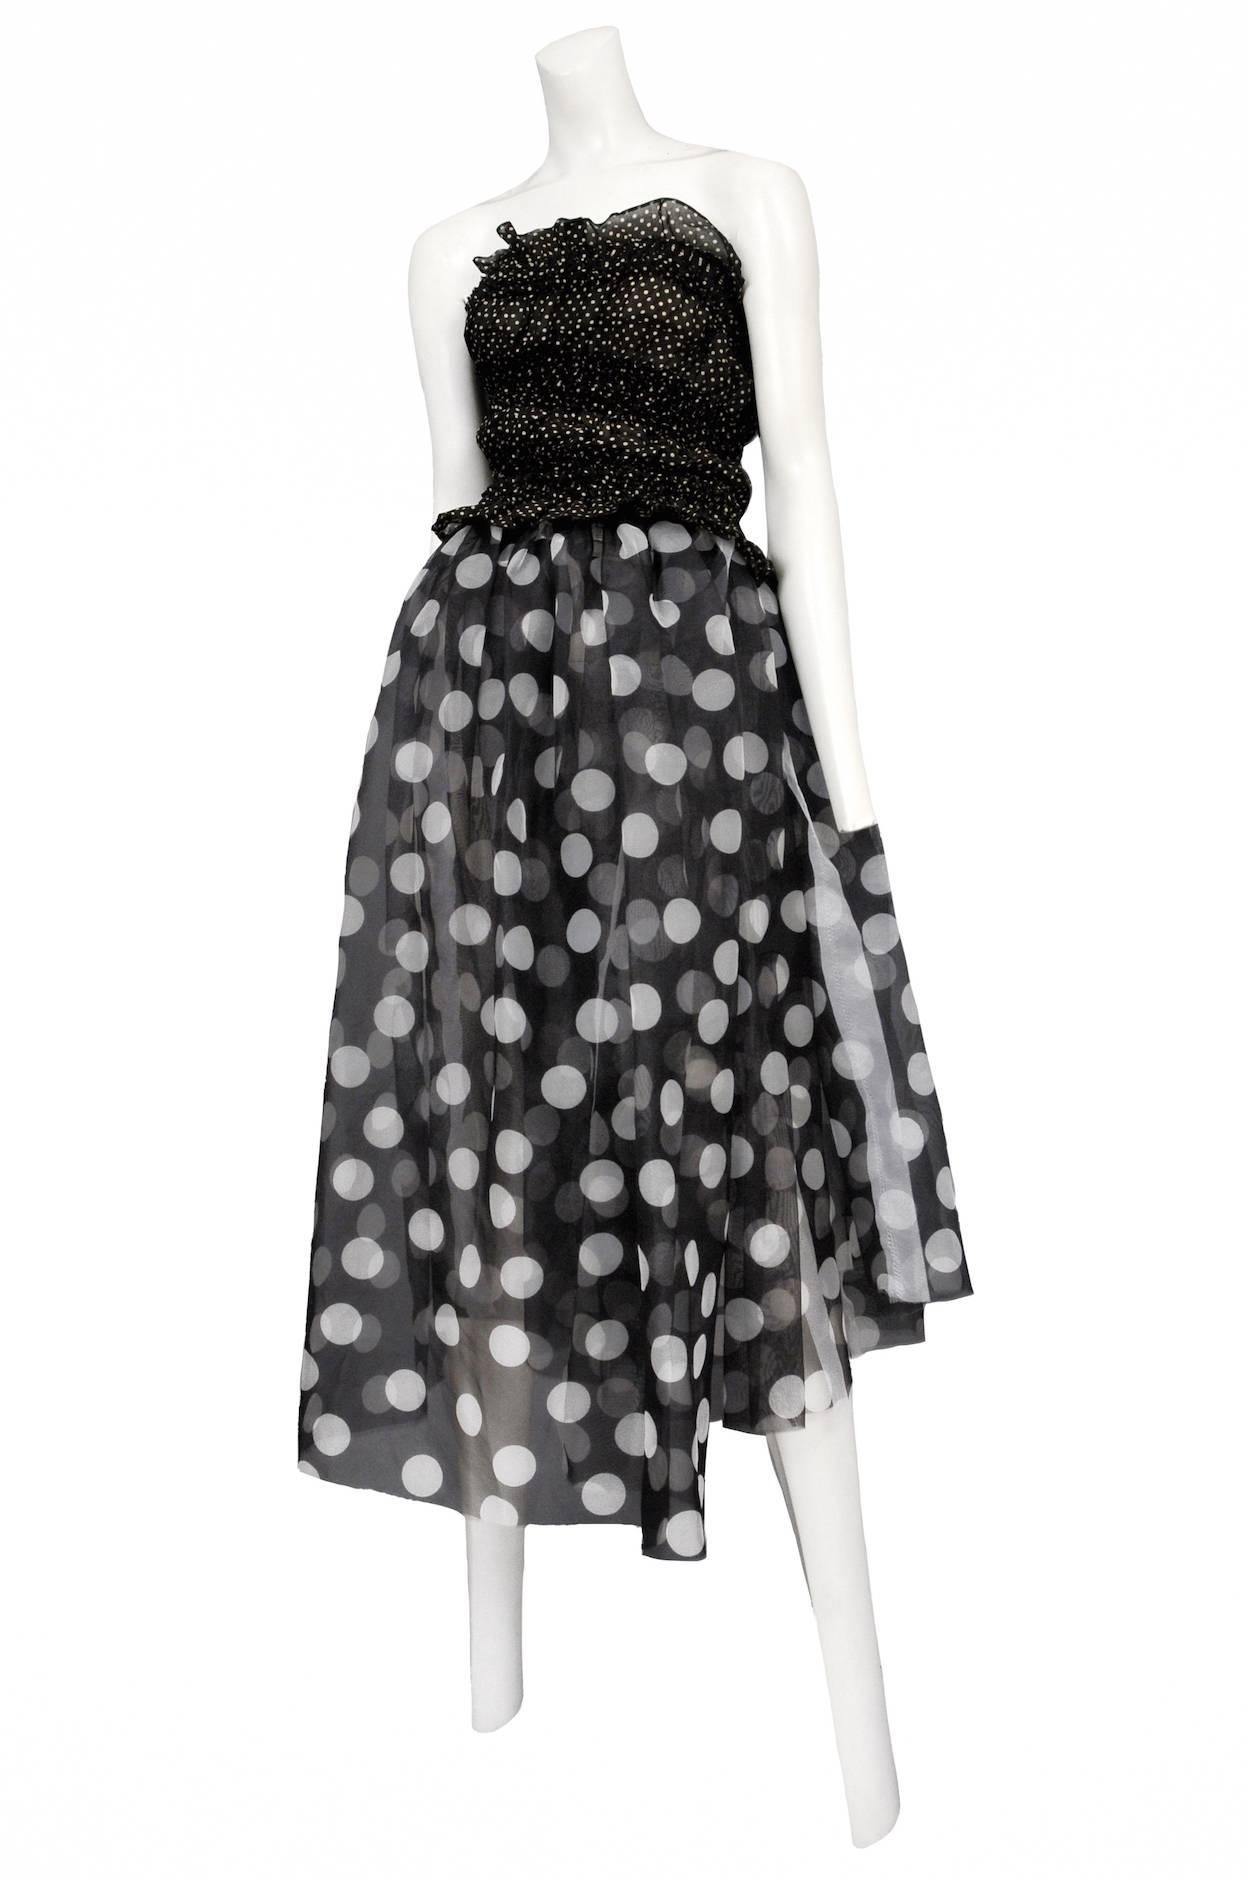 Vintage Tao for Comme des Garcons strapless polka dress featuring a tube style top with small scale black and white polka dots attached to a gathered long skirt with large scale black and white polka dots. A runway piece from the Spring / Summer